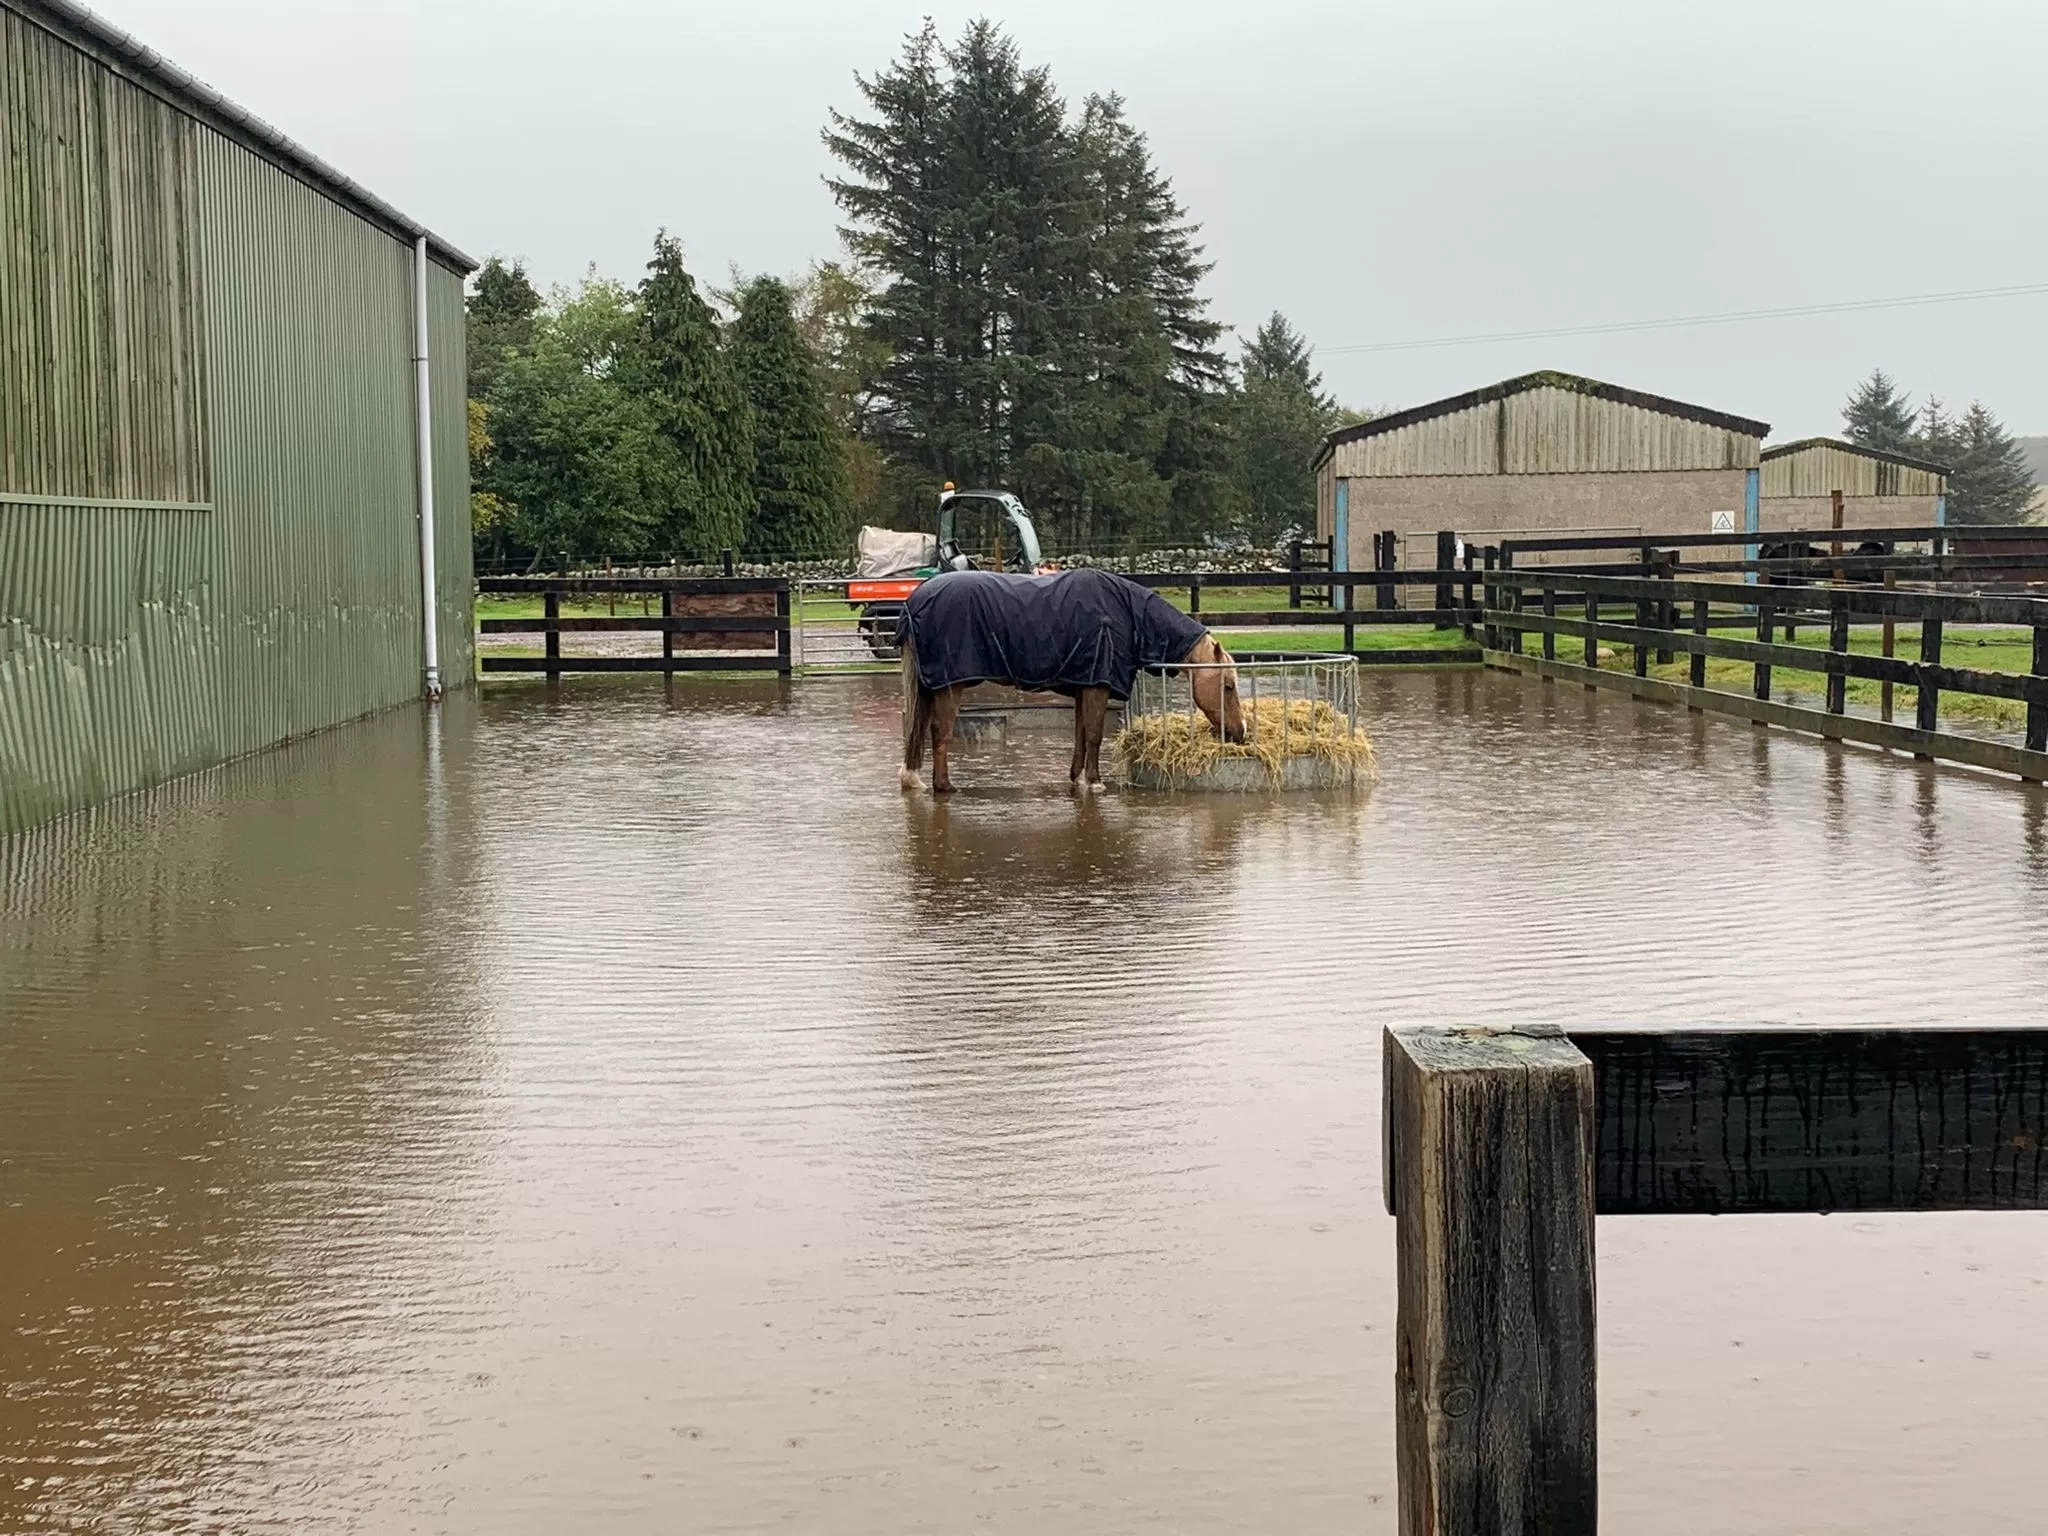 A horse standing in a flooded paddock at Redwings Mountains